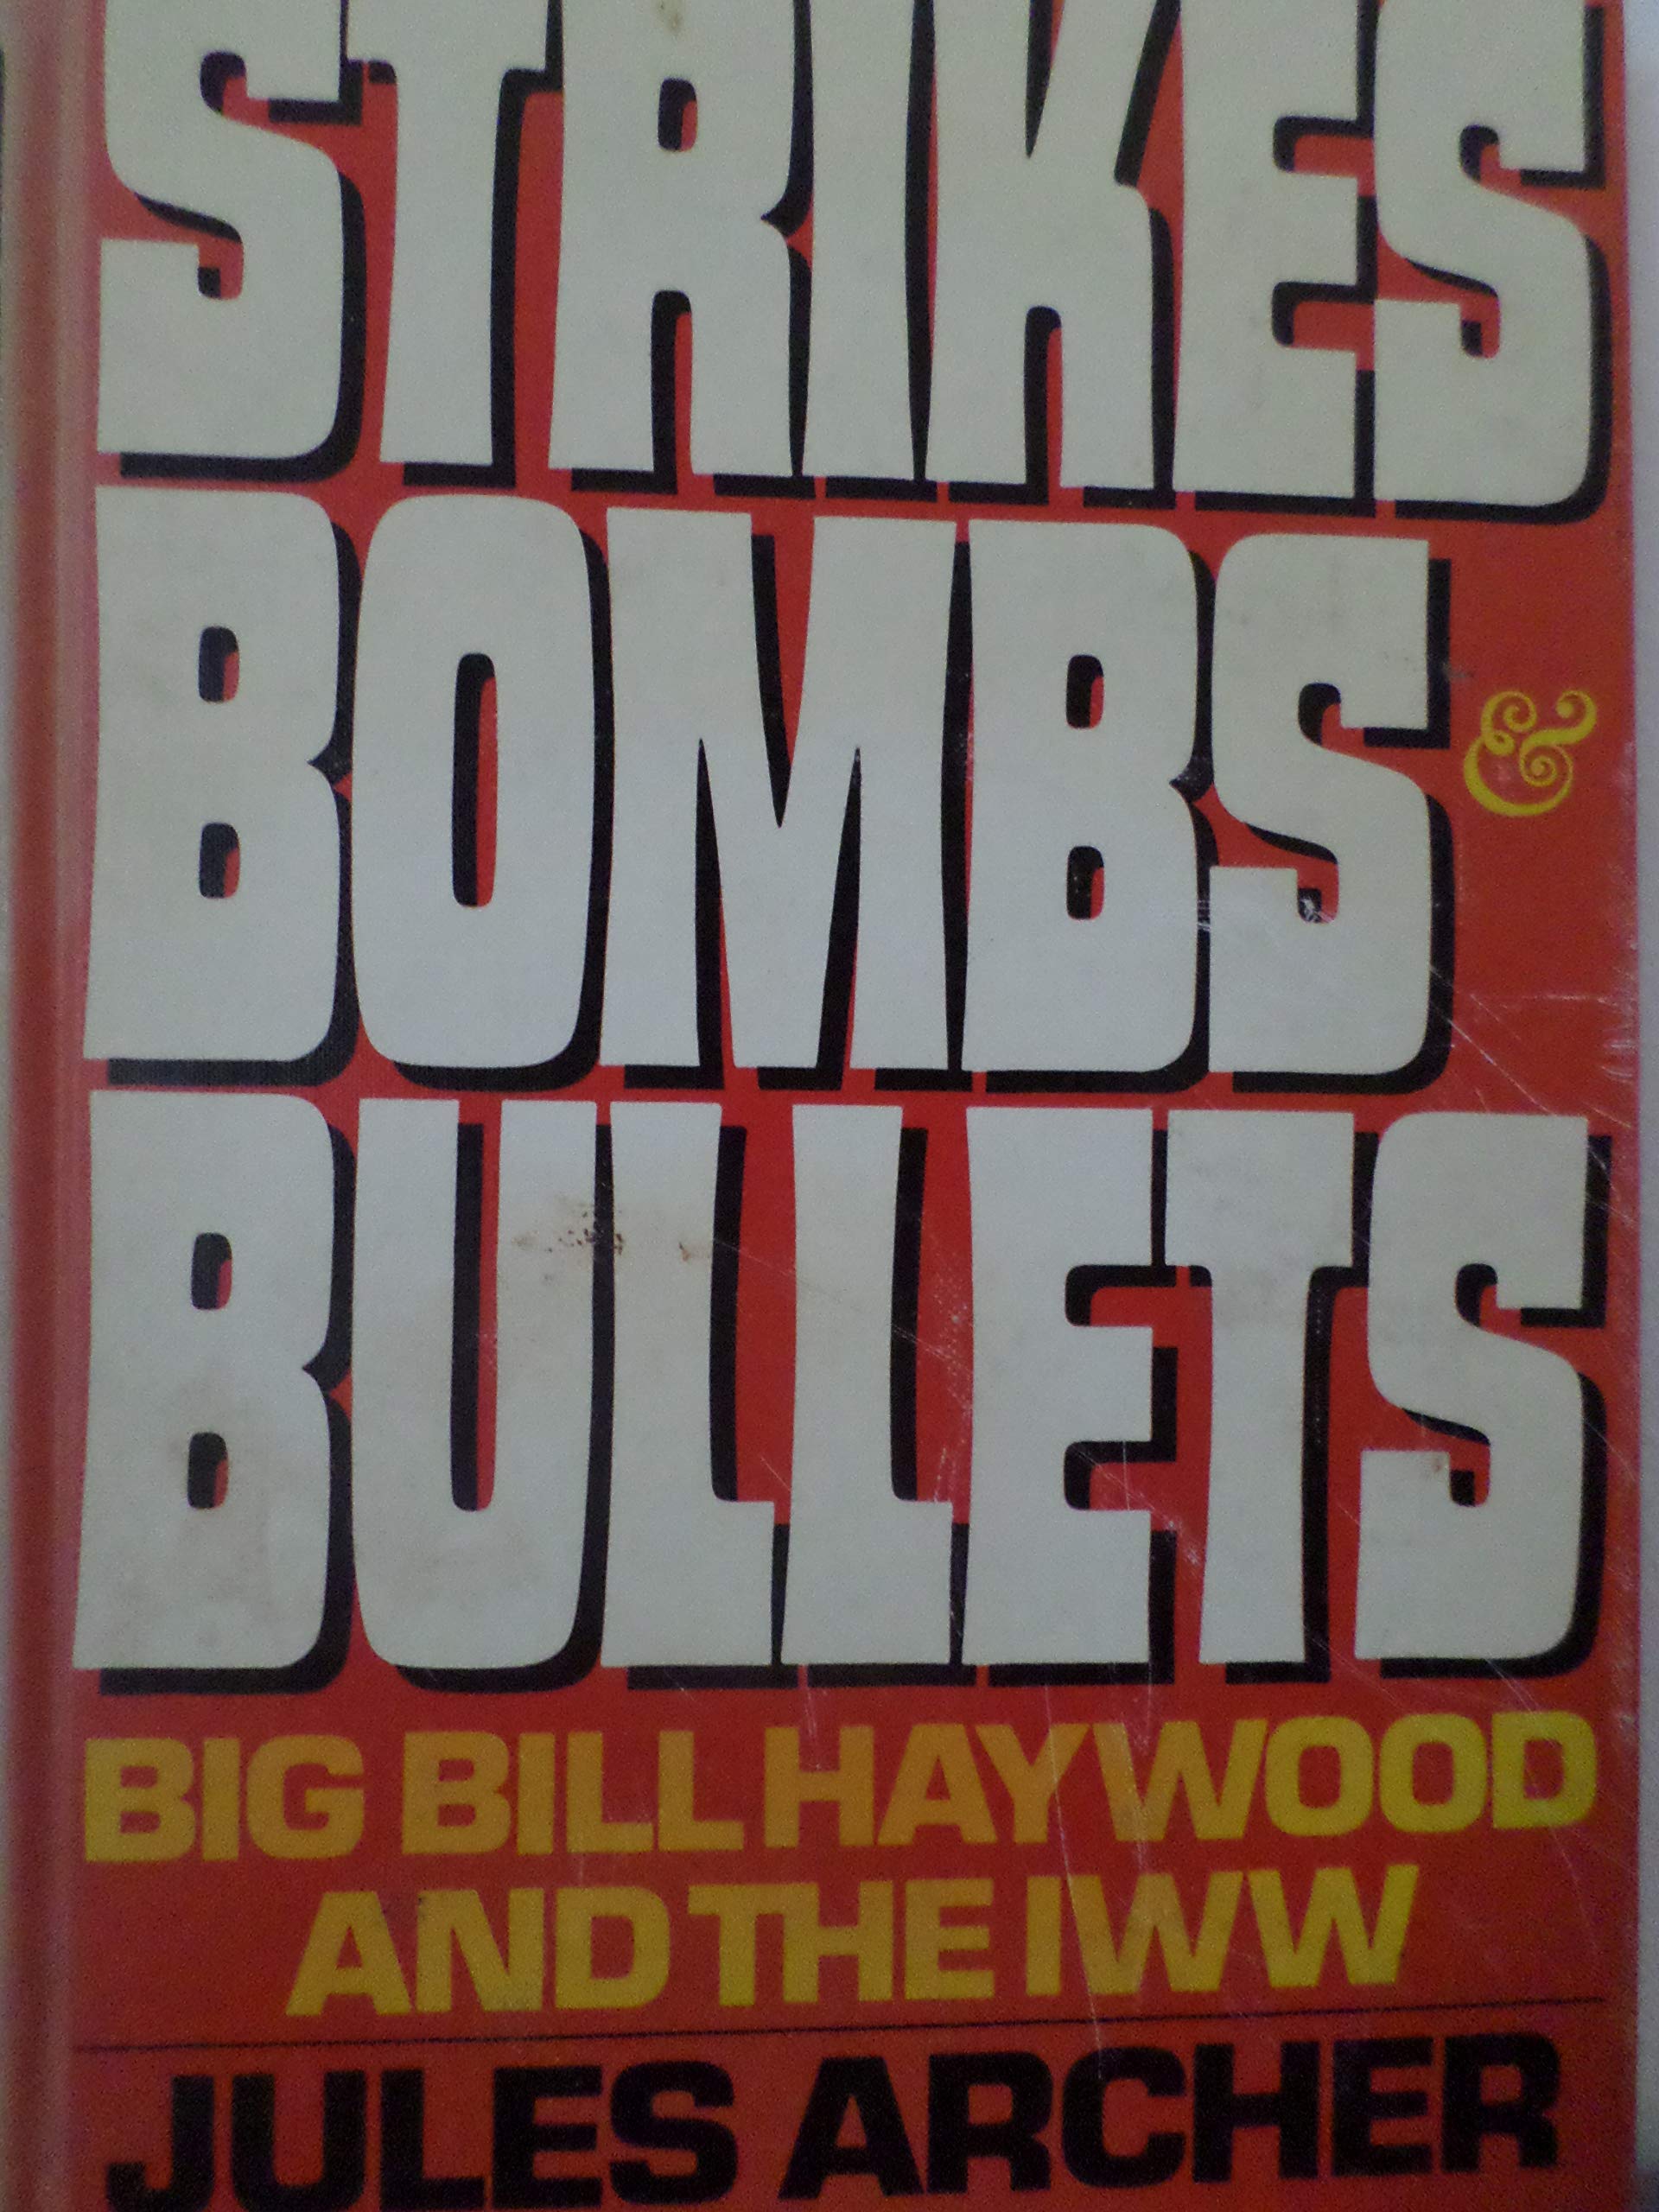 Strikes, bombs & bullets: Big Bill Haywood and the IWW (book cover)